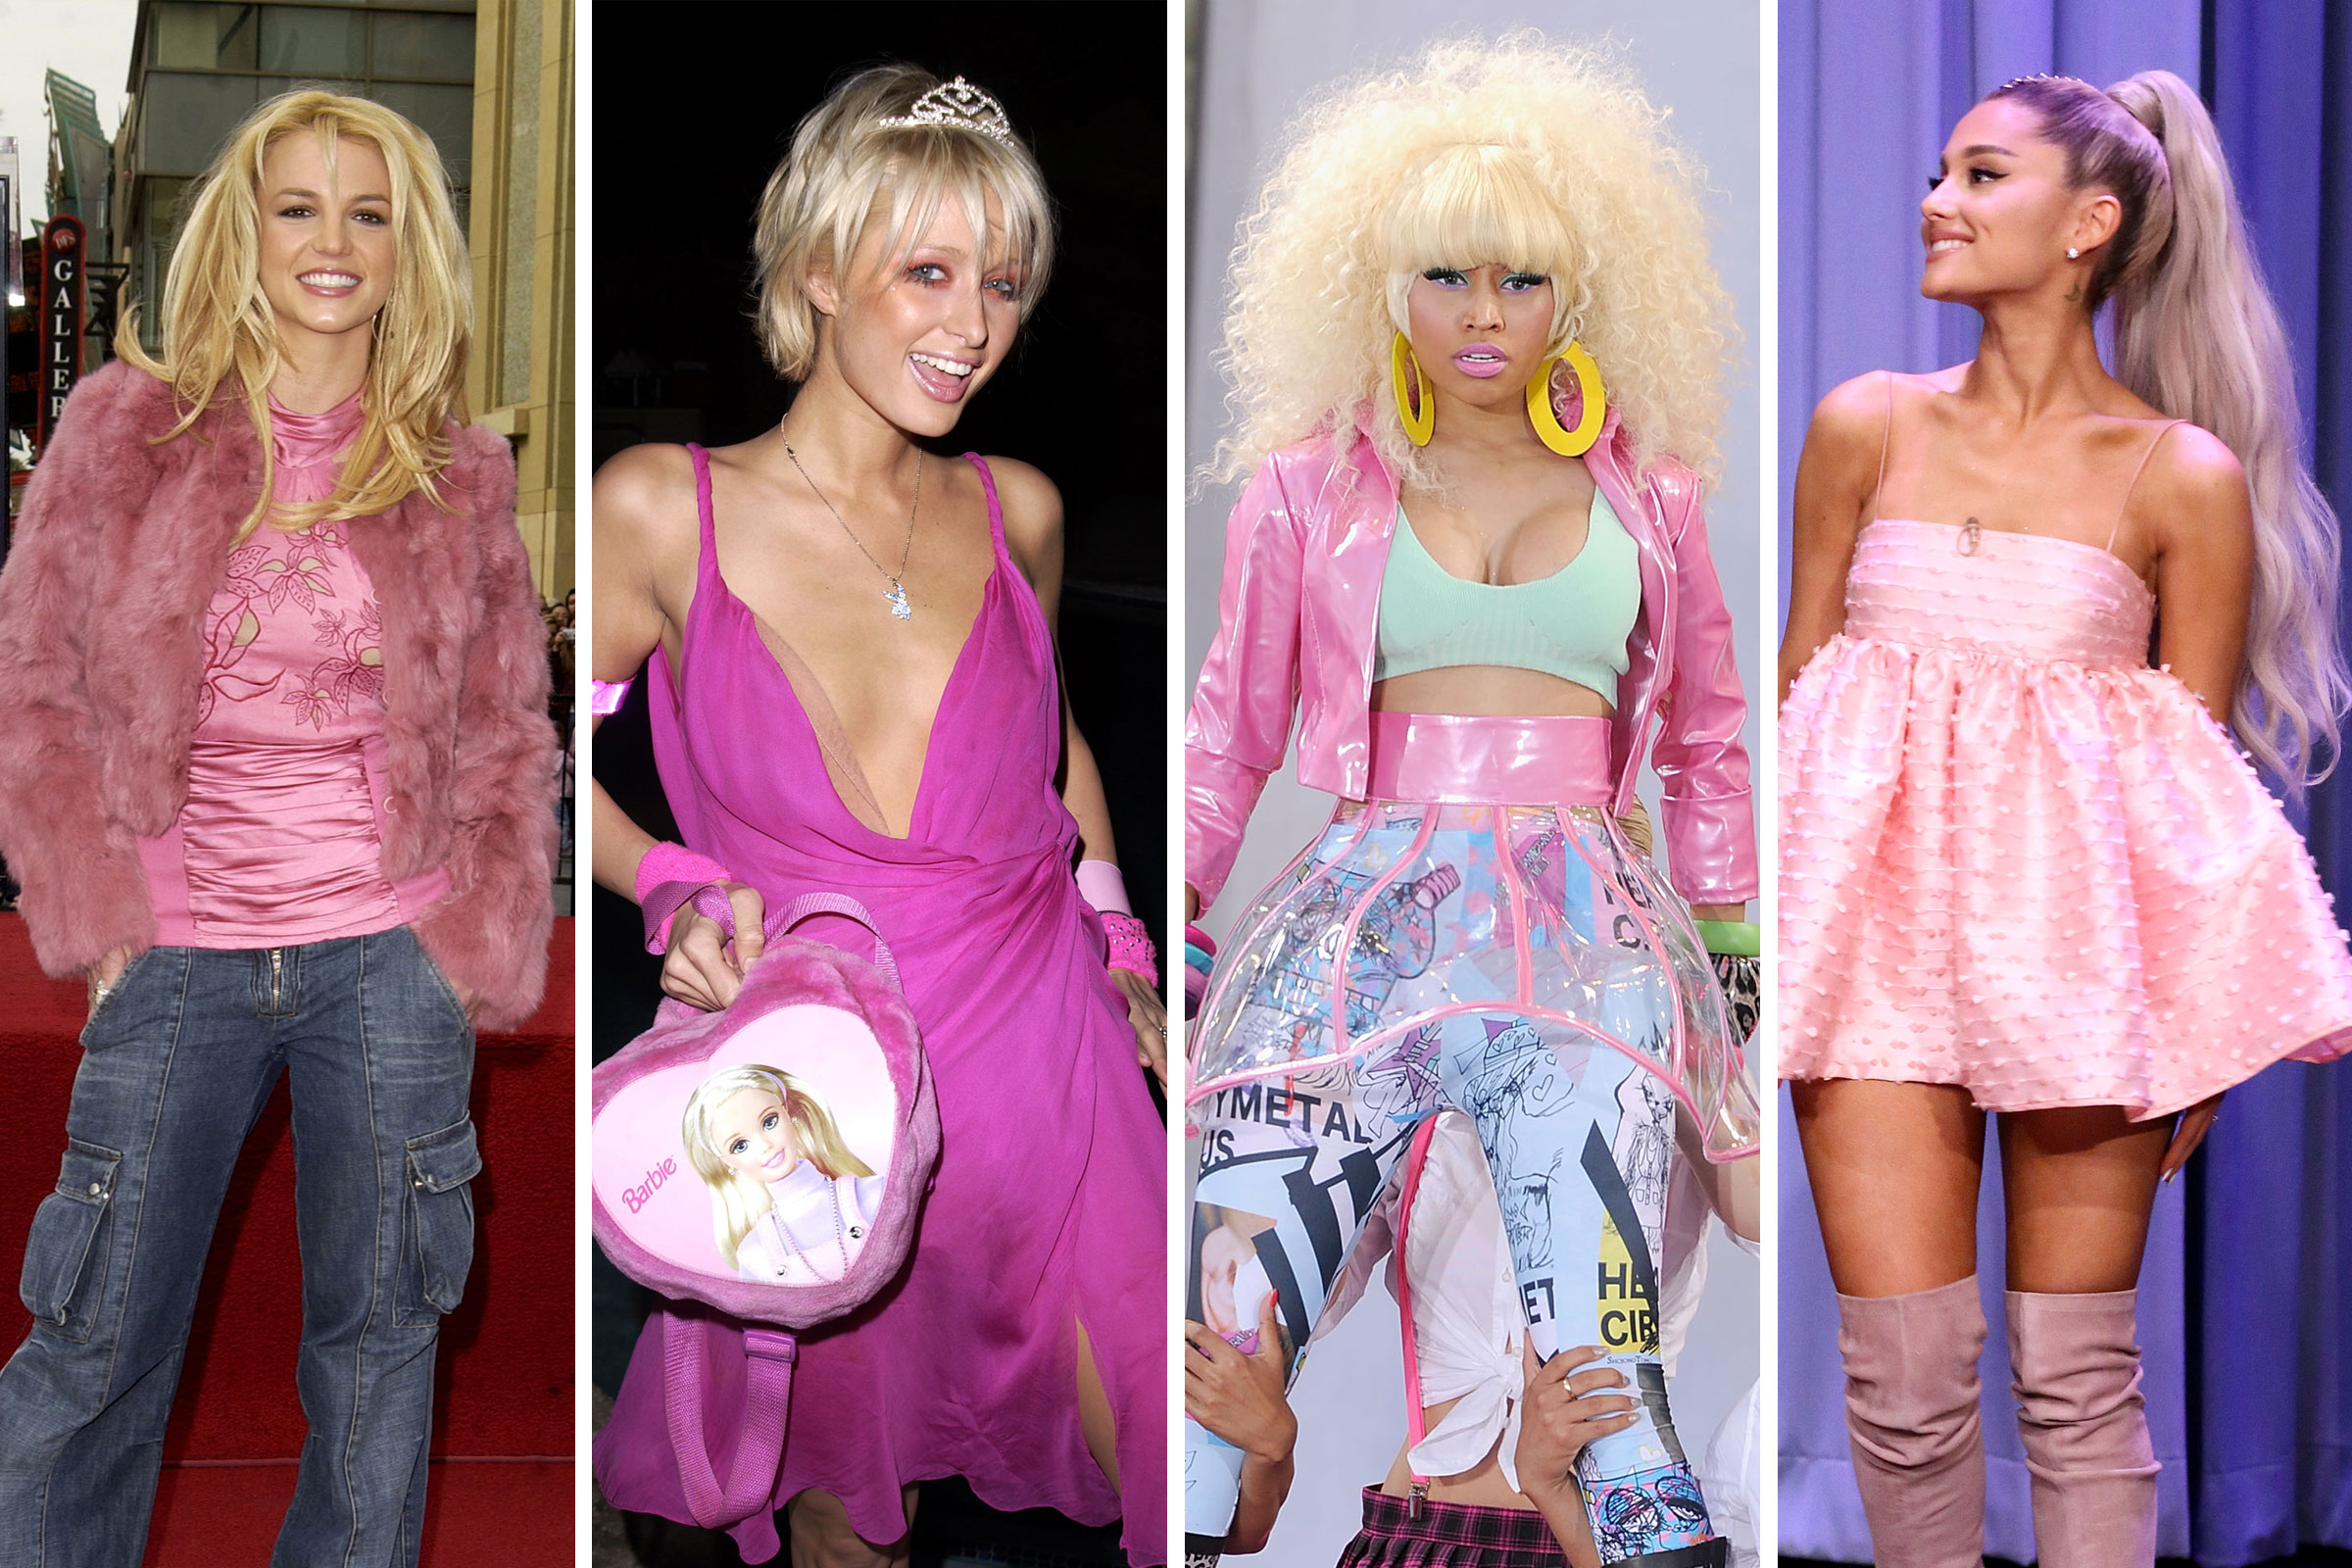 A grid of images of Britney Spears, Paris Hilton, Nikki Minaj and Ariana Grande all wearing barbie inspired outfits